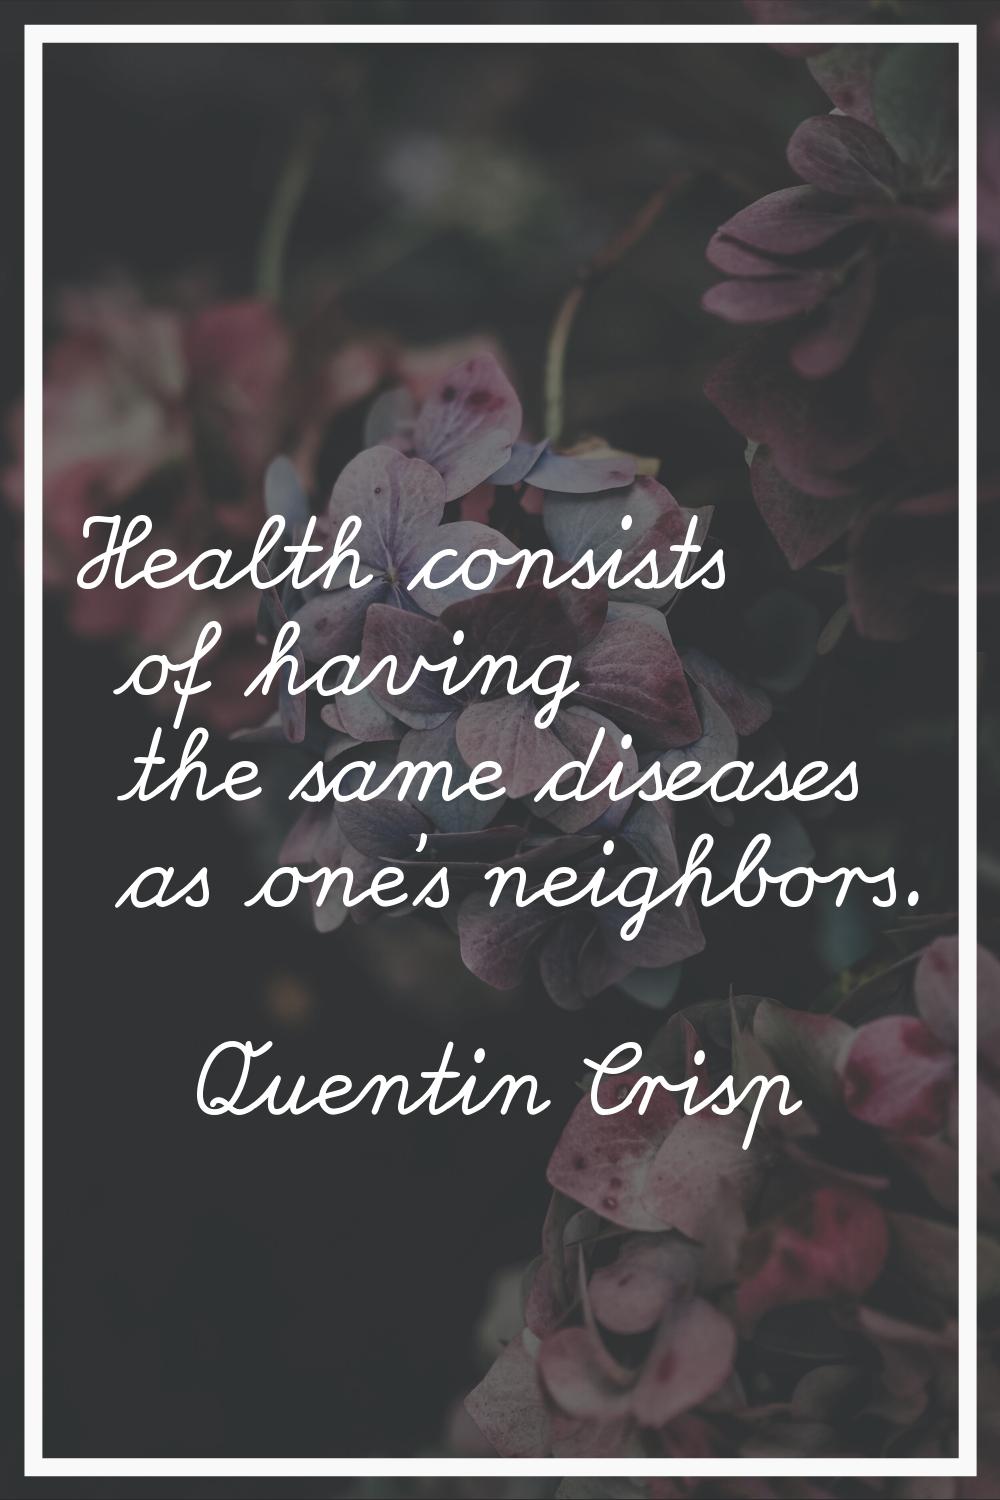 Health consists of having the same diseases as one's neighbors.